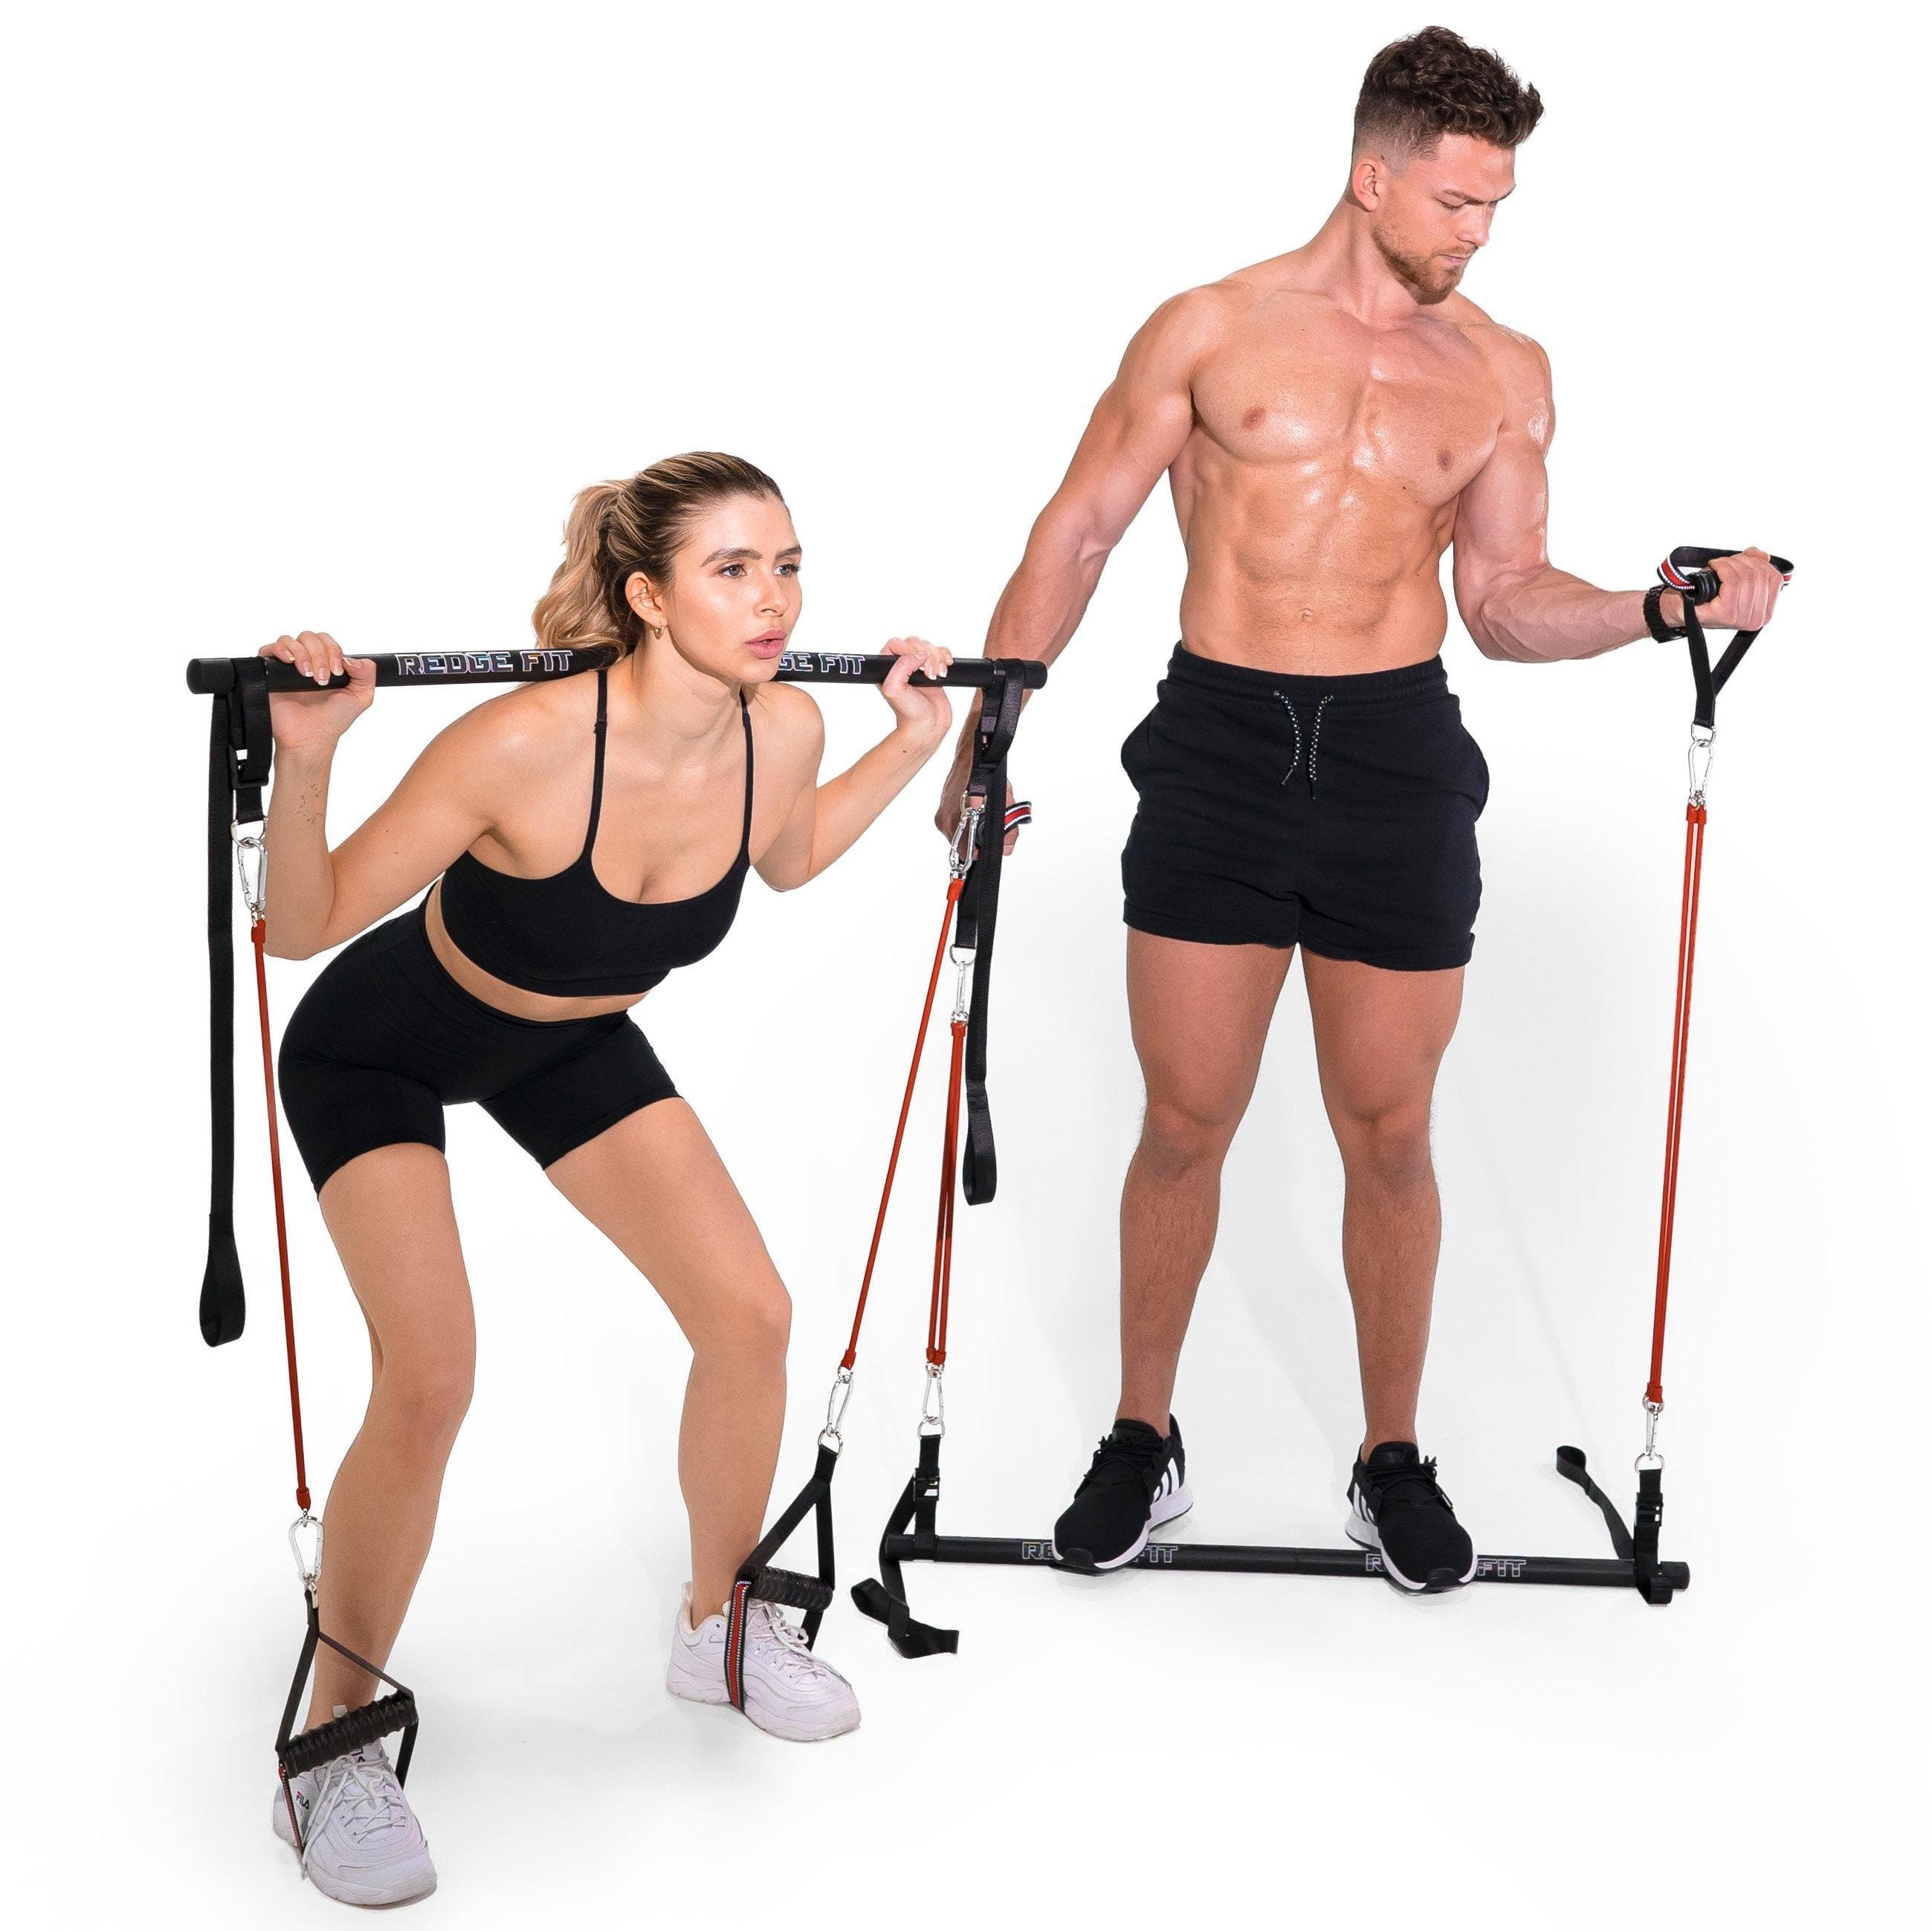 Man and Woman modeling the Redge Fit Portable Gym Machine Available at https://www.getredge.com/products/bar